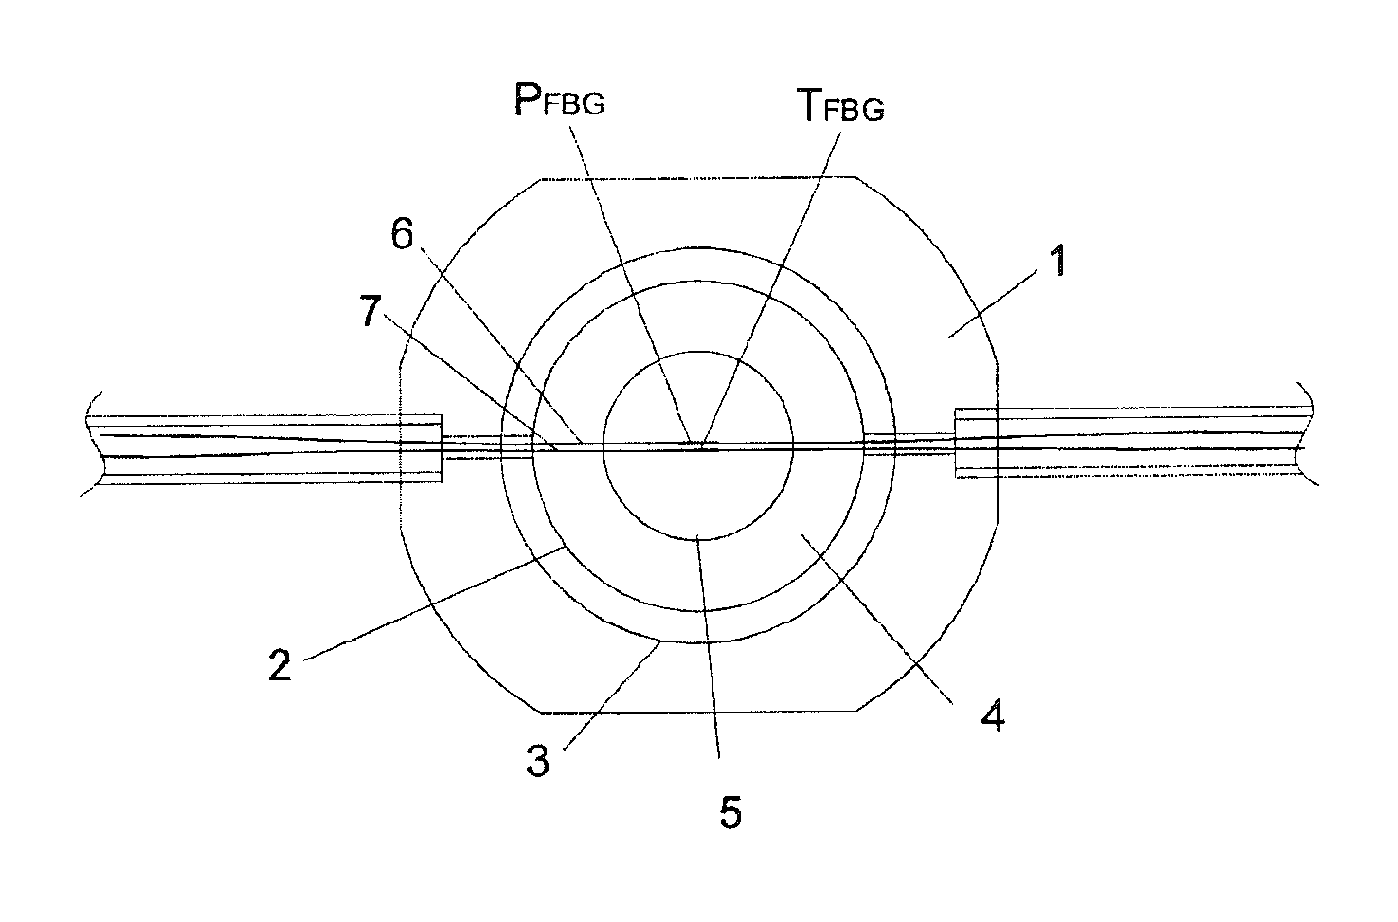 Pressure sensor assembly and method of using the assembly